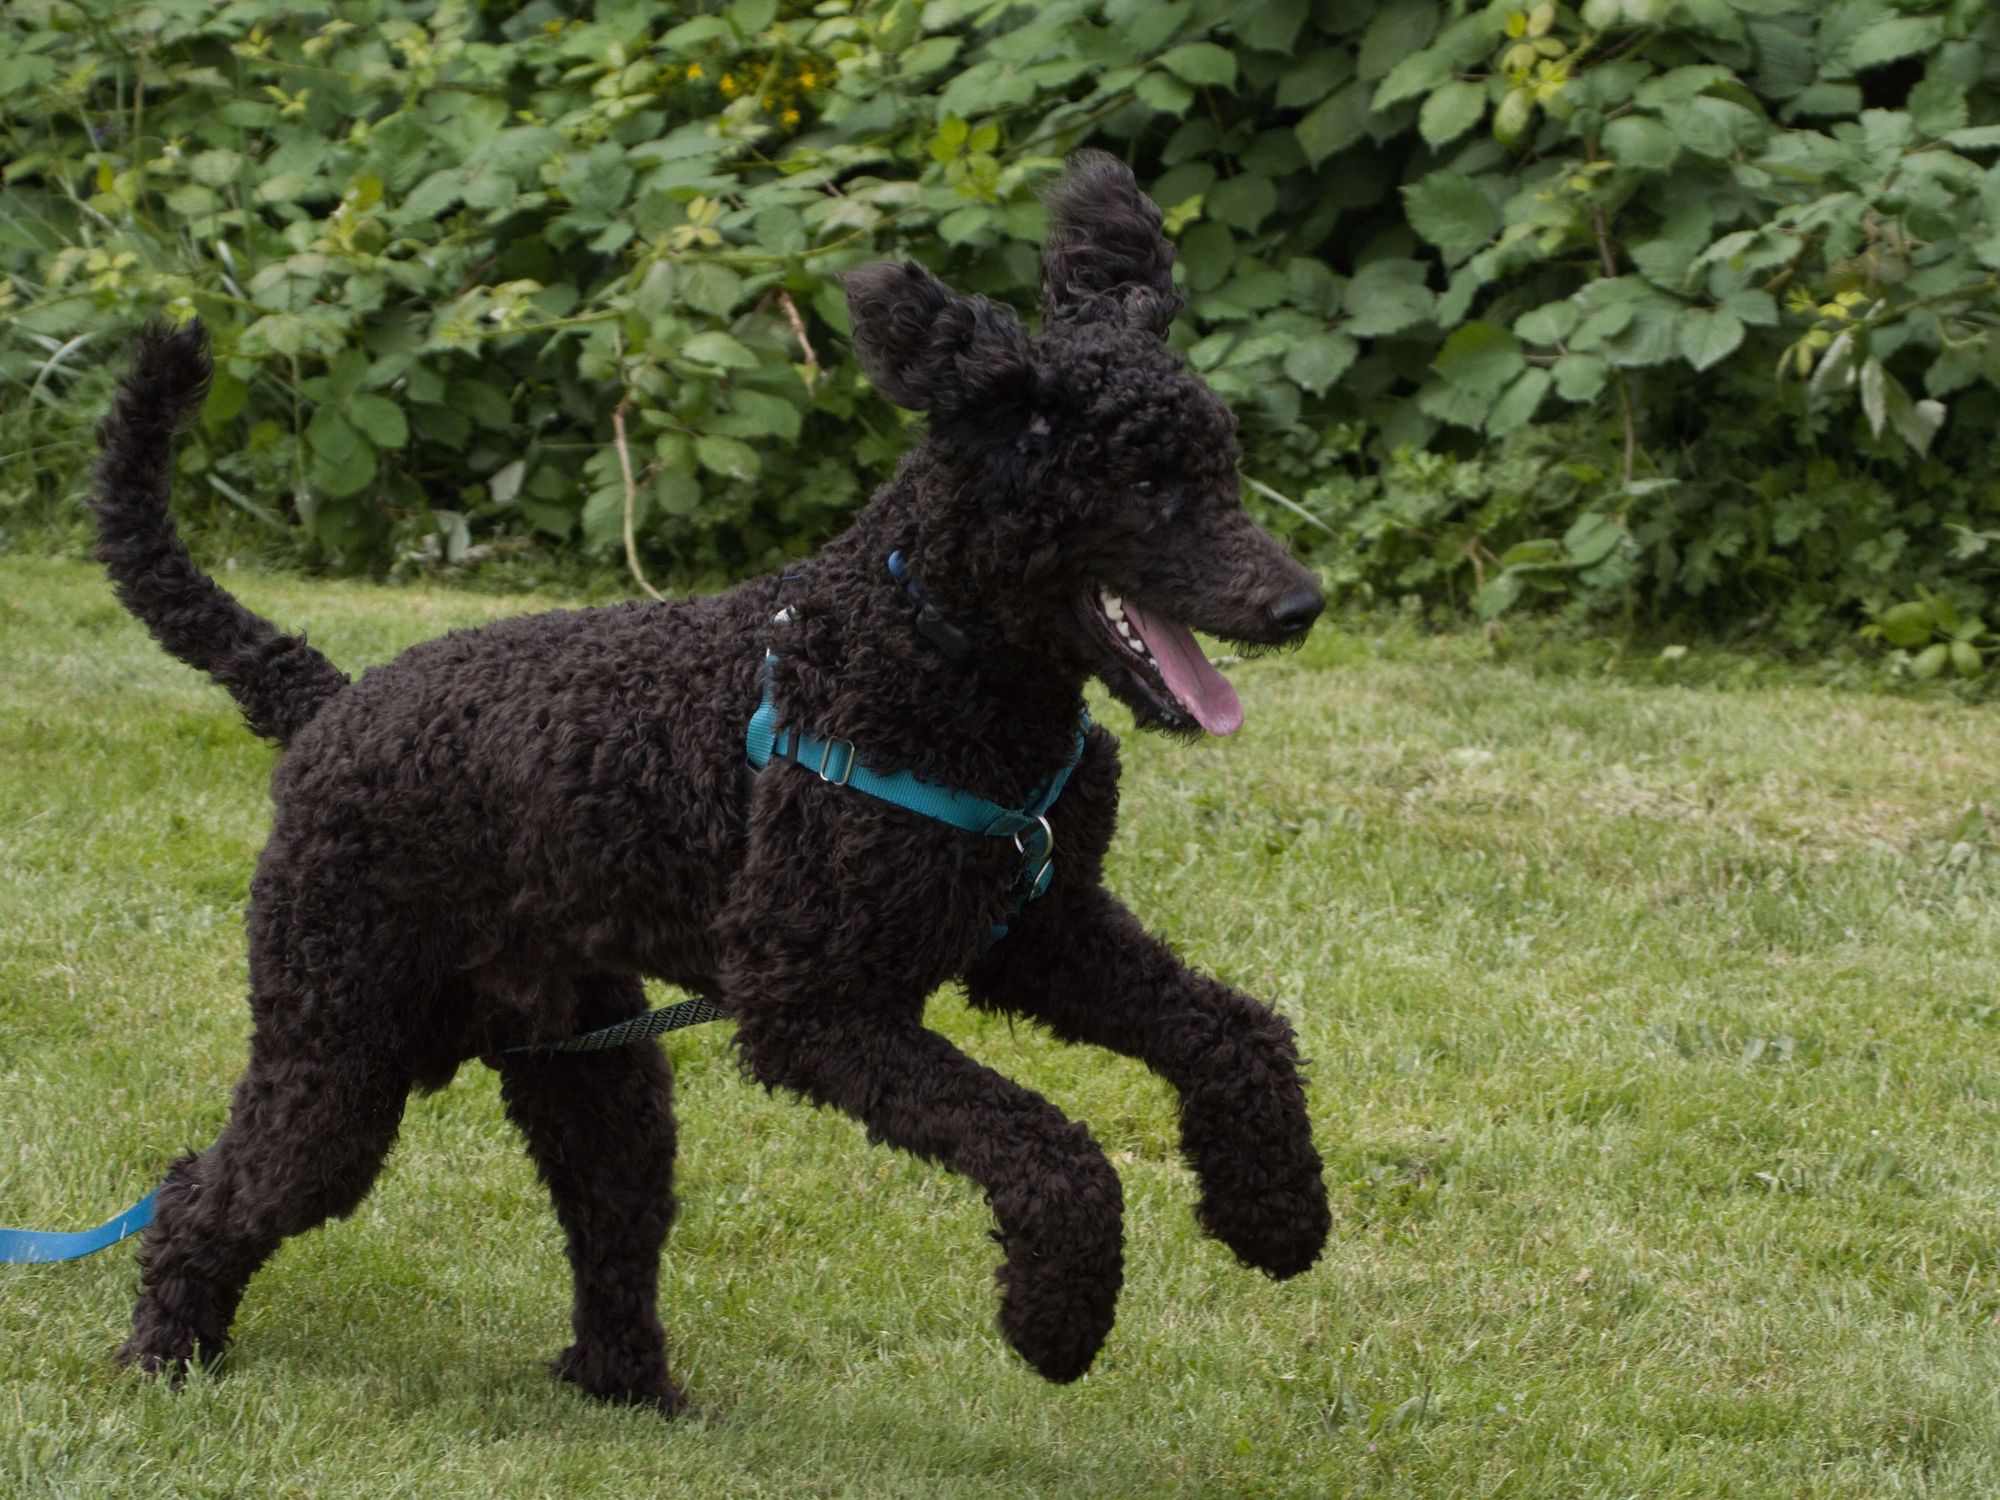 black-poodle-frolics-in-a-lush-green-yard